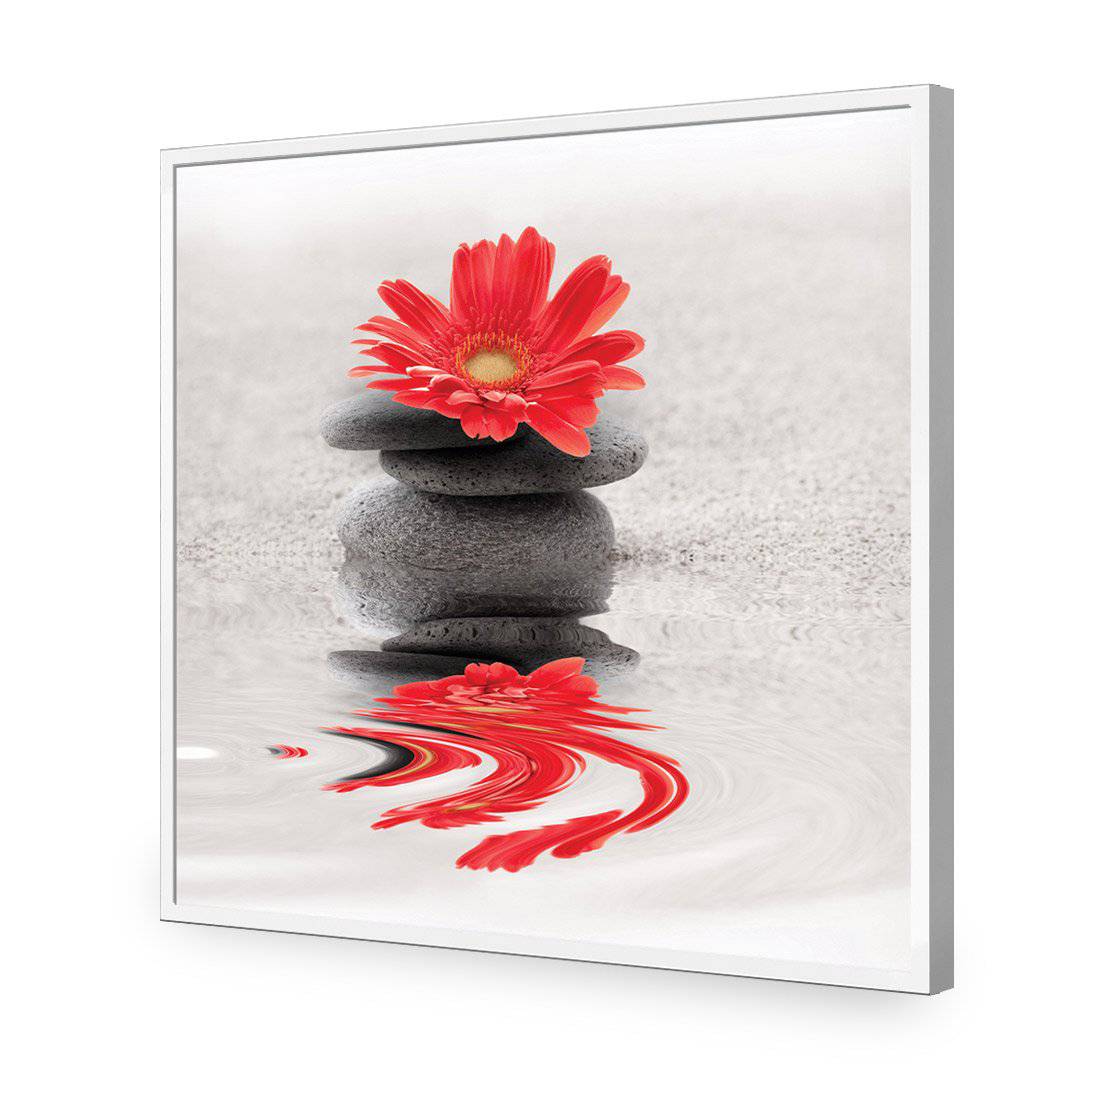 Red Flower Reflection, Square-Acrylic-Wall Art Design-Without Border-Acrylic - White Frame-37x37cm-Wall Art Designs